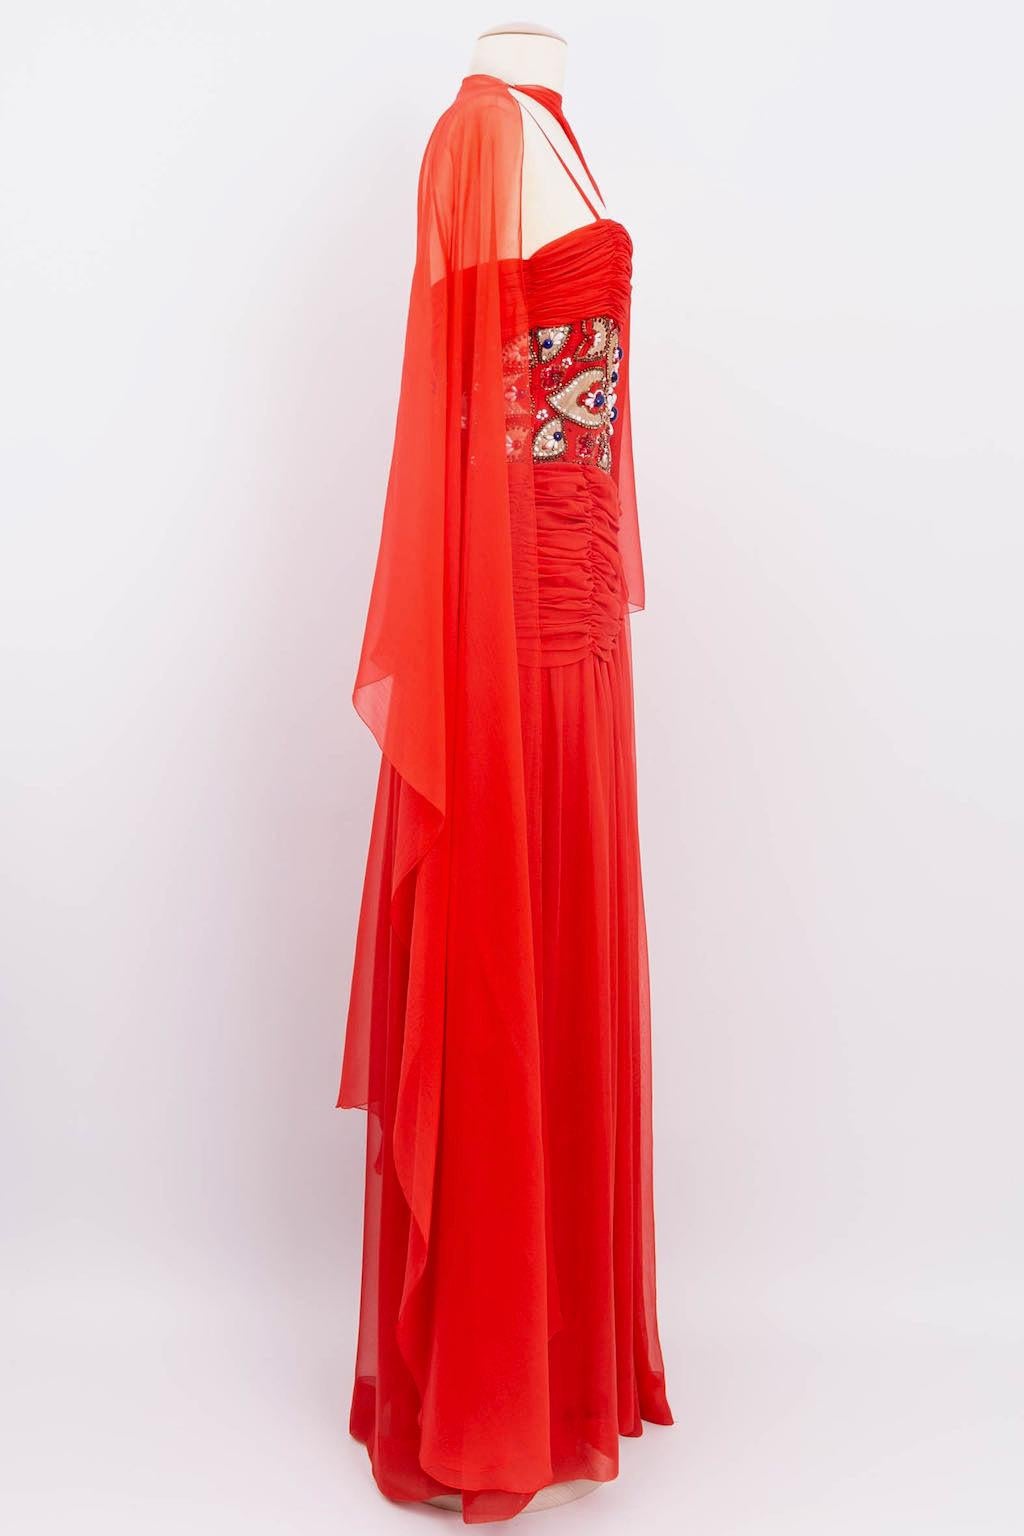 Givenchy Haute Couture Bustier Embroidered Silk Chiffon Dress For Sale 4